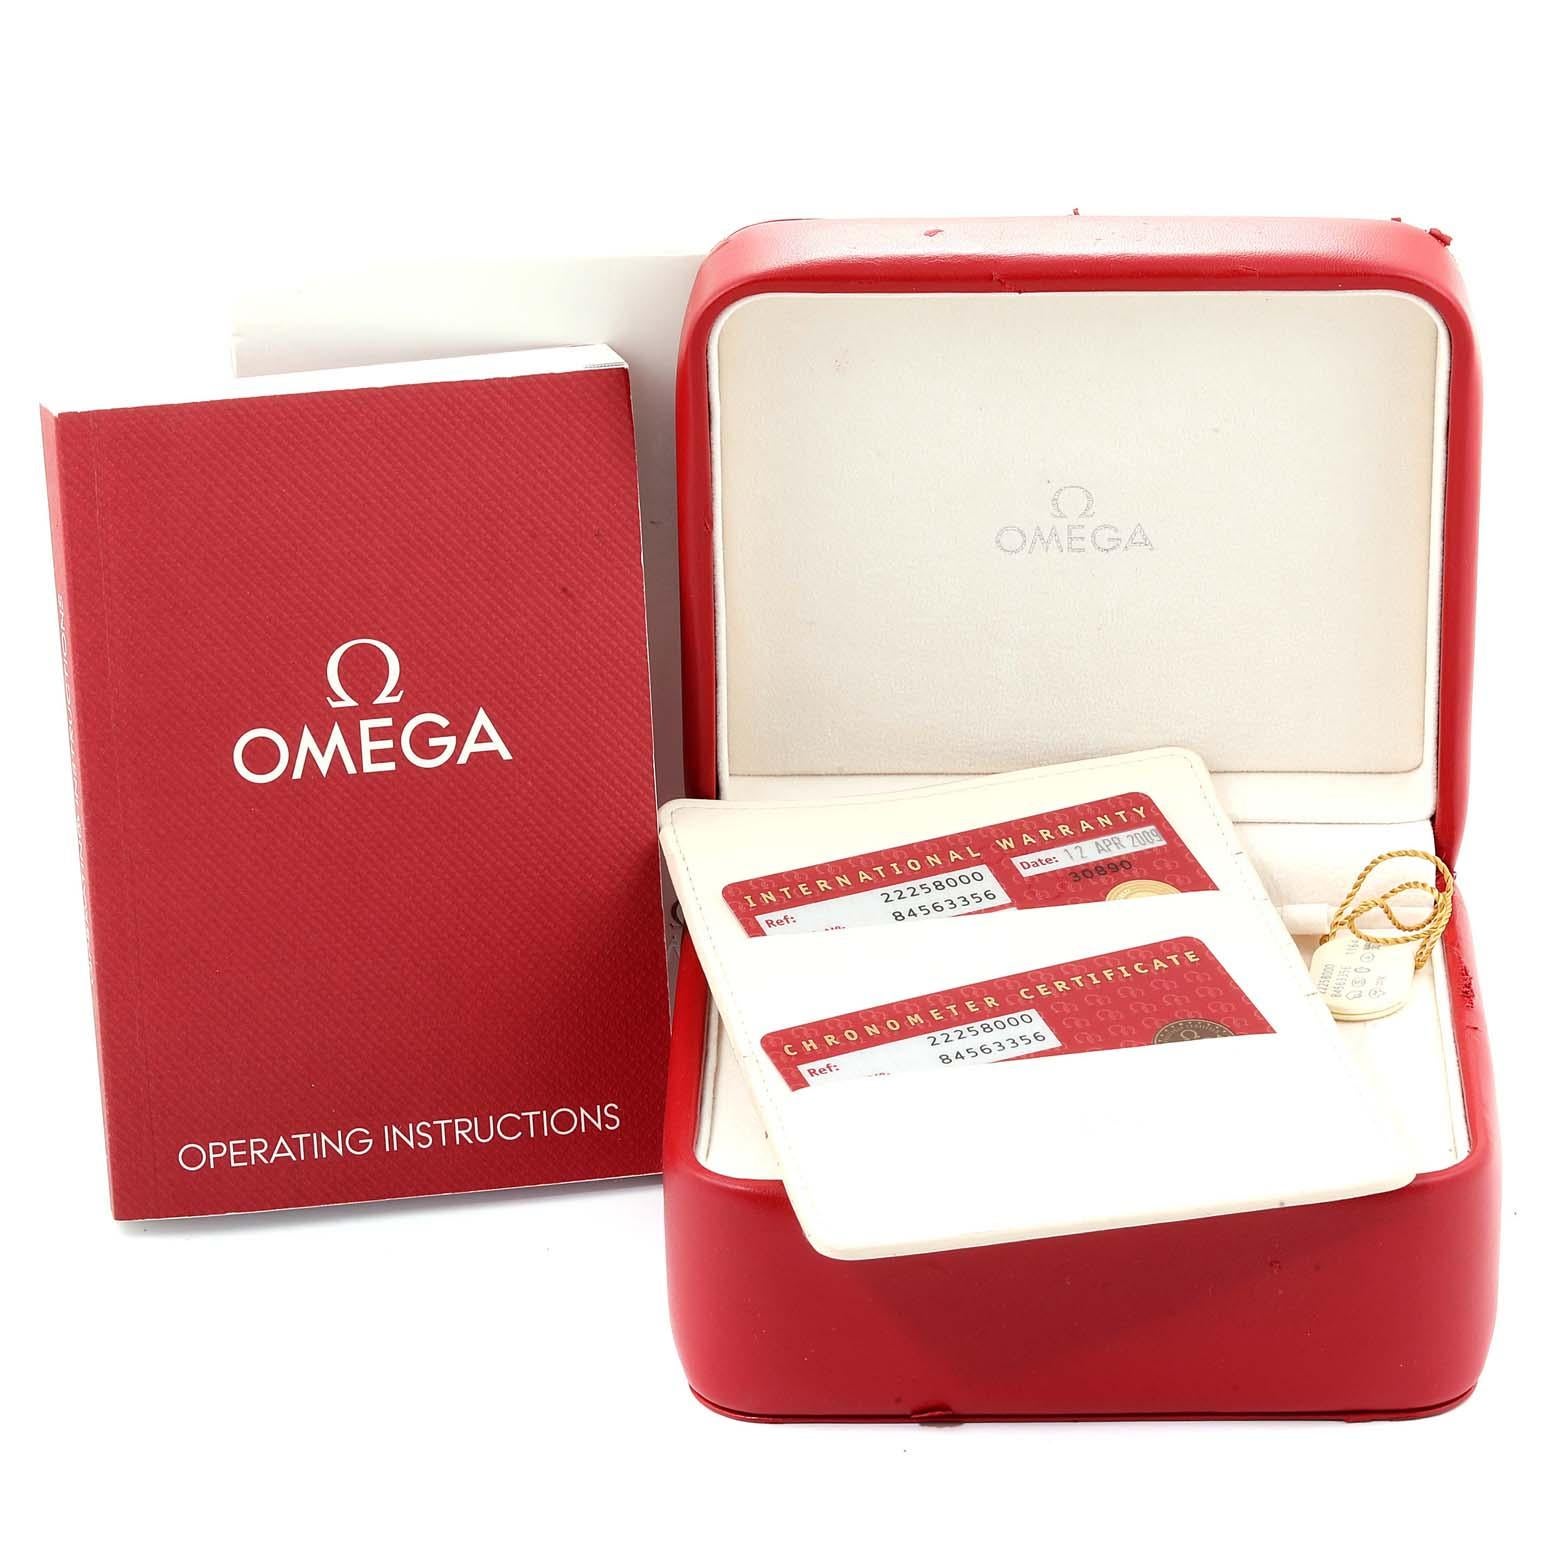 Omega Seamaster 300 Chronograph Men's Watch 2225.80.00 Box Card For Sale 7